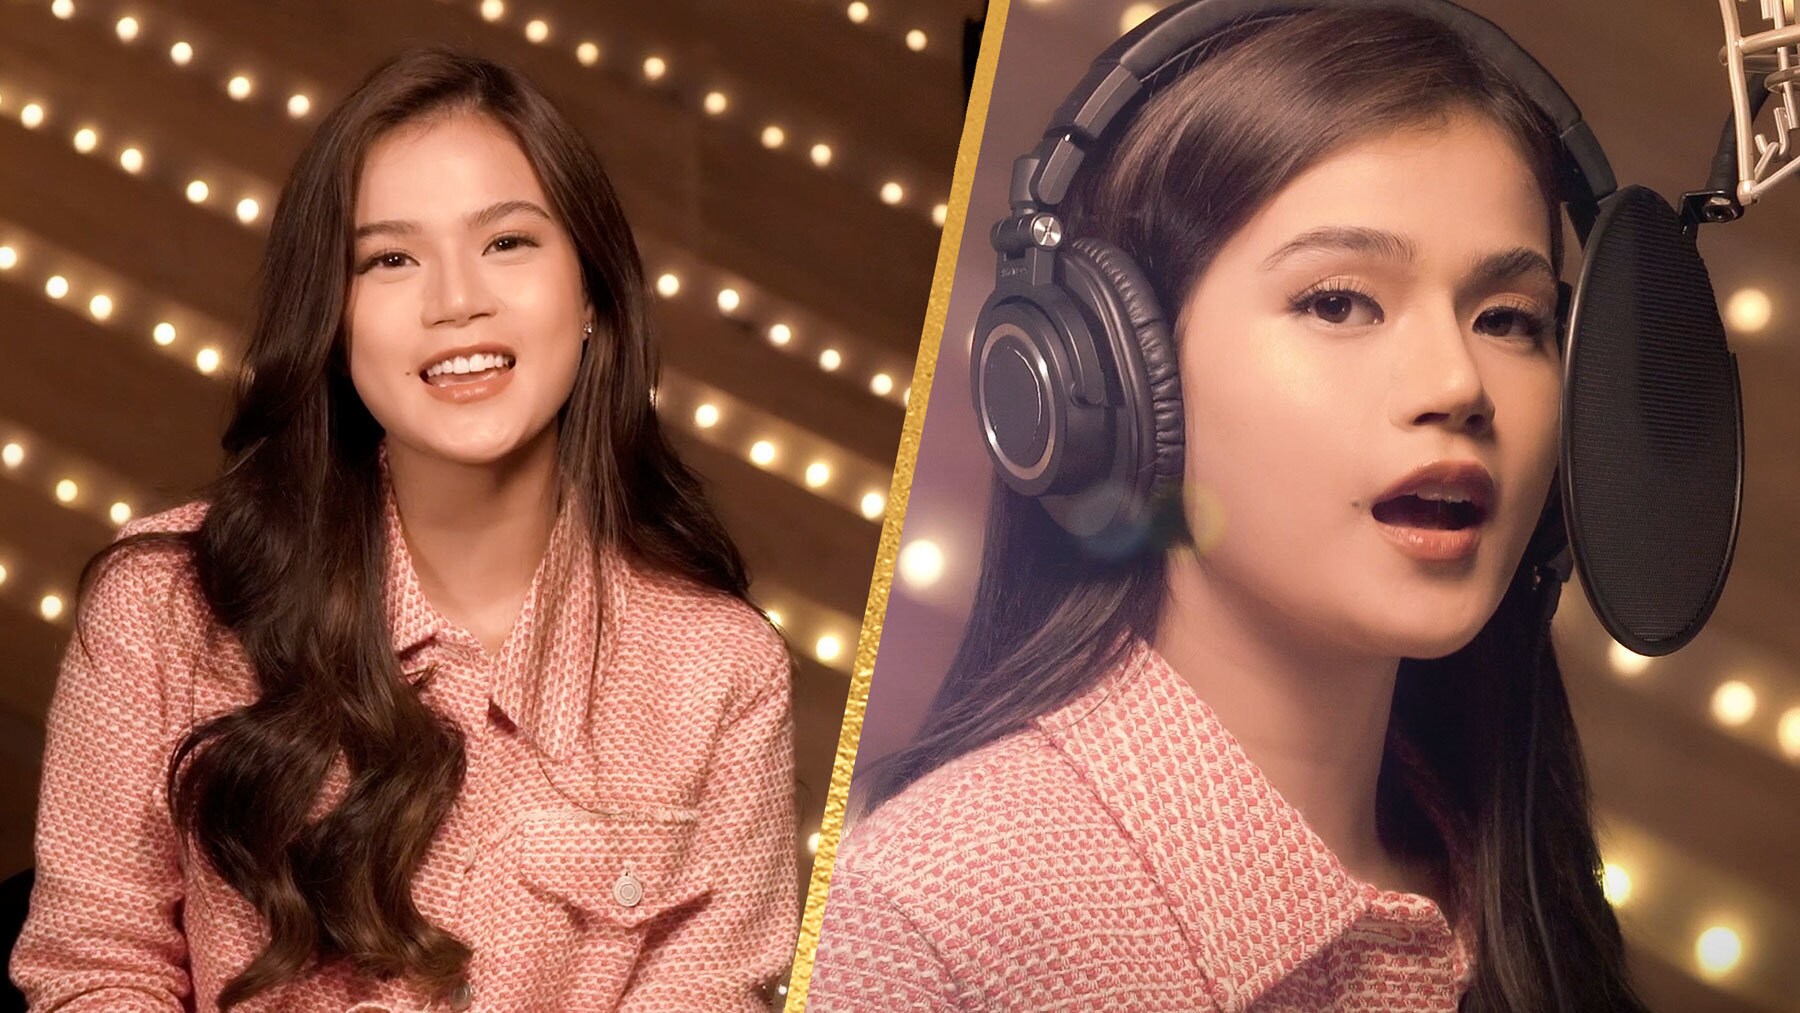 Come Behind The Scenes of “Simulan – Starting Now” with Maris Racal